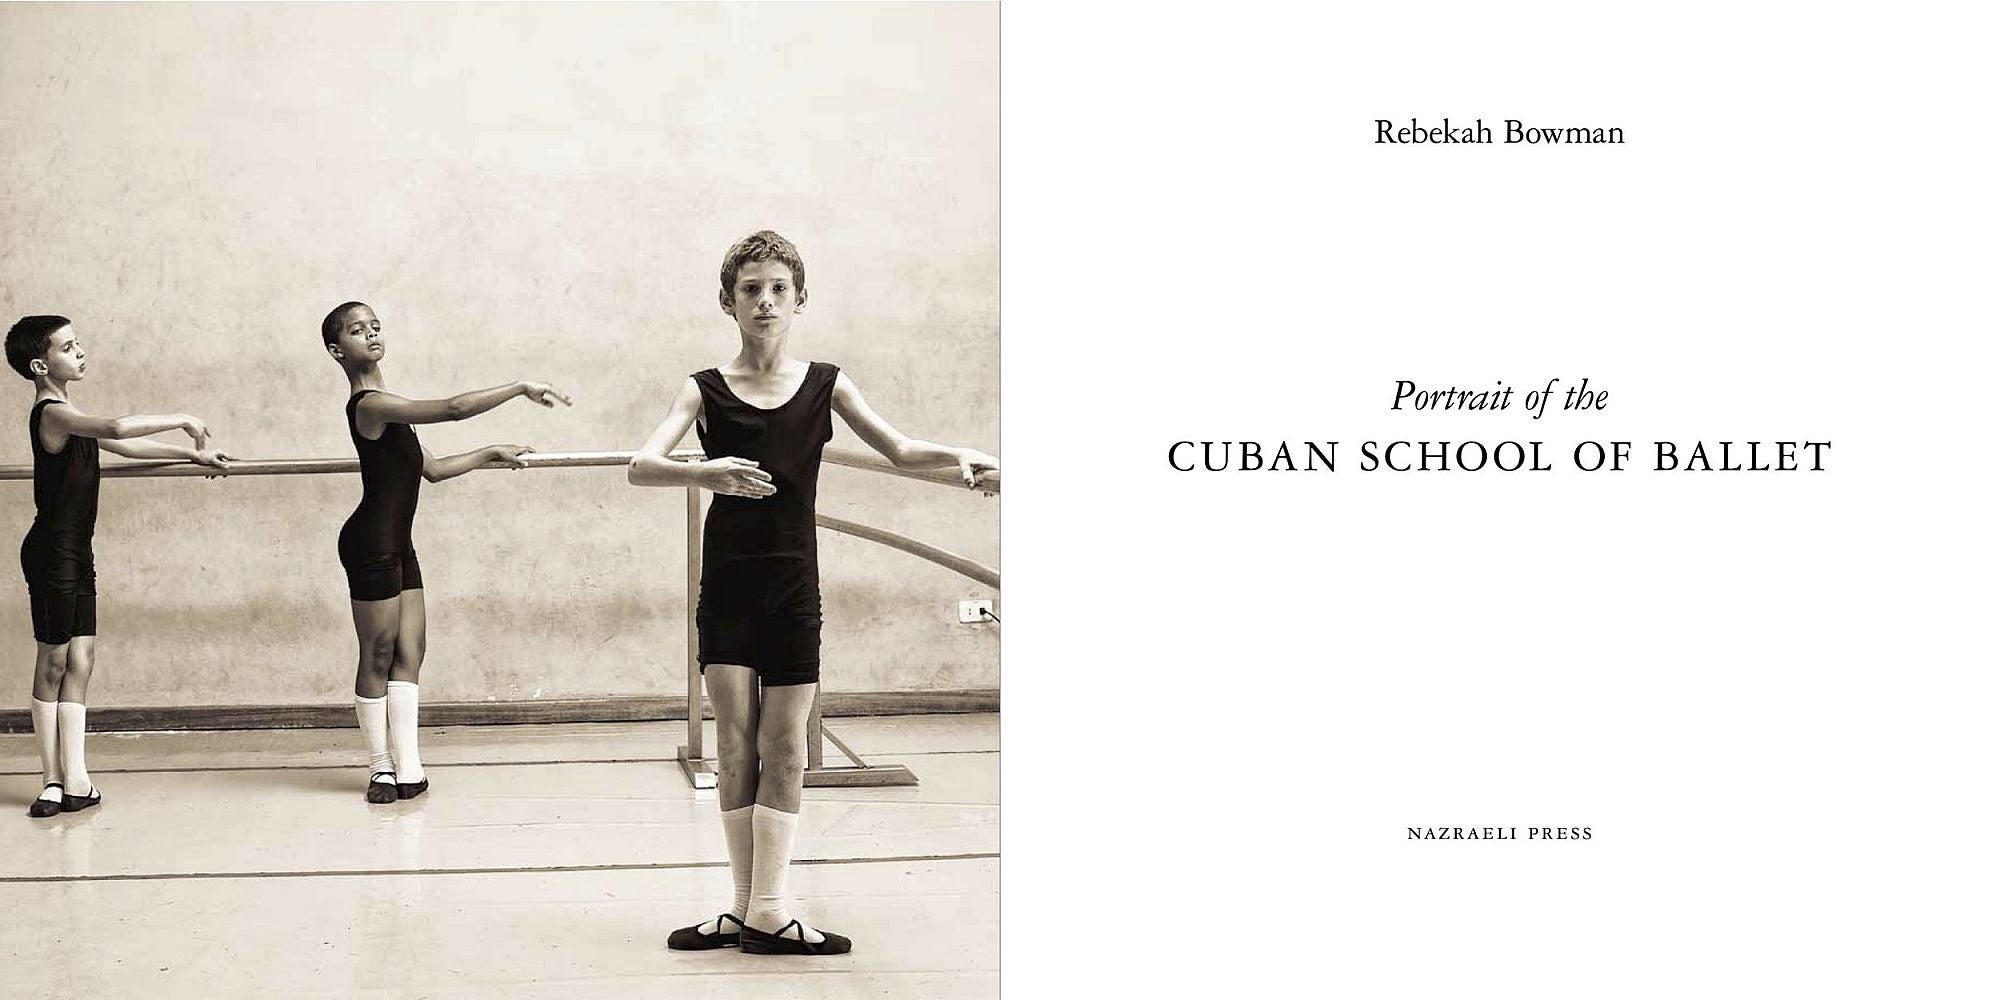 Rebekah Bowman: Portrait of the Cuban School of Ballet, Special Limited Edition (with Original Print) [SIGNED]